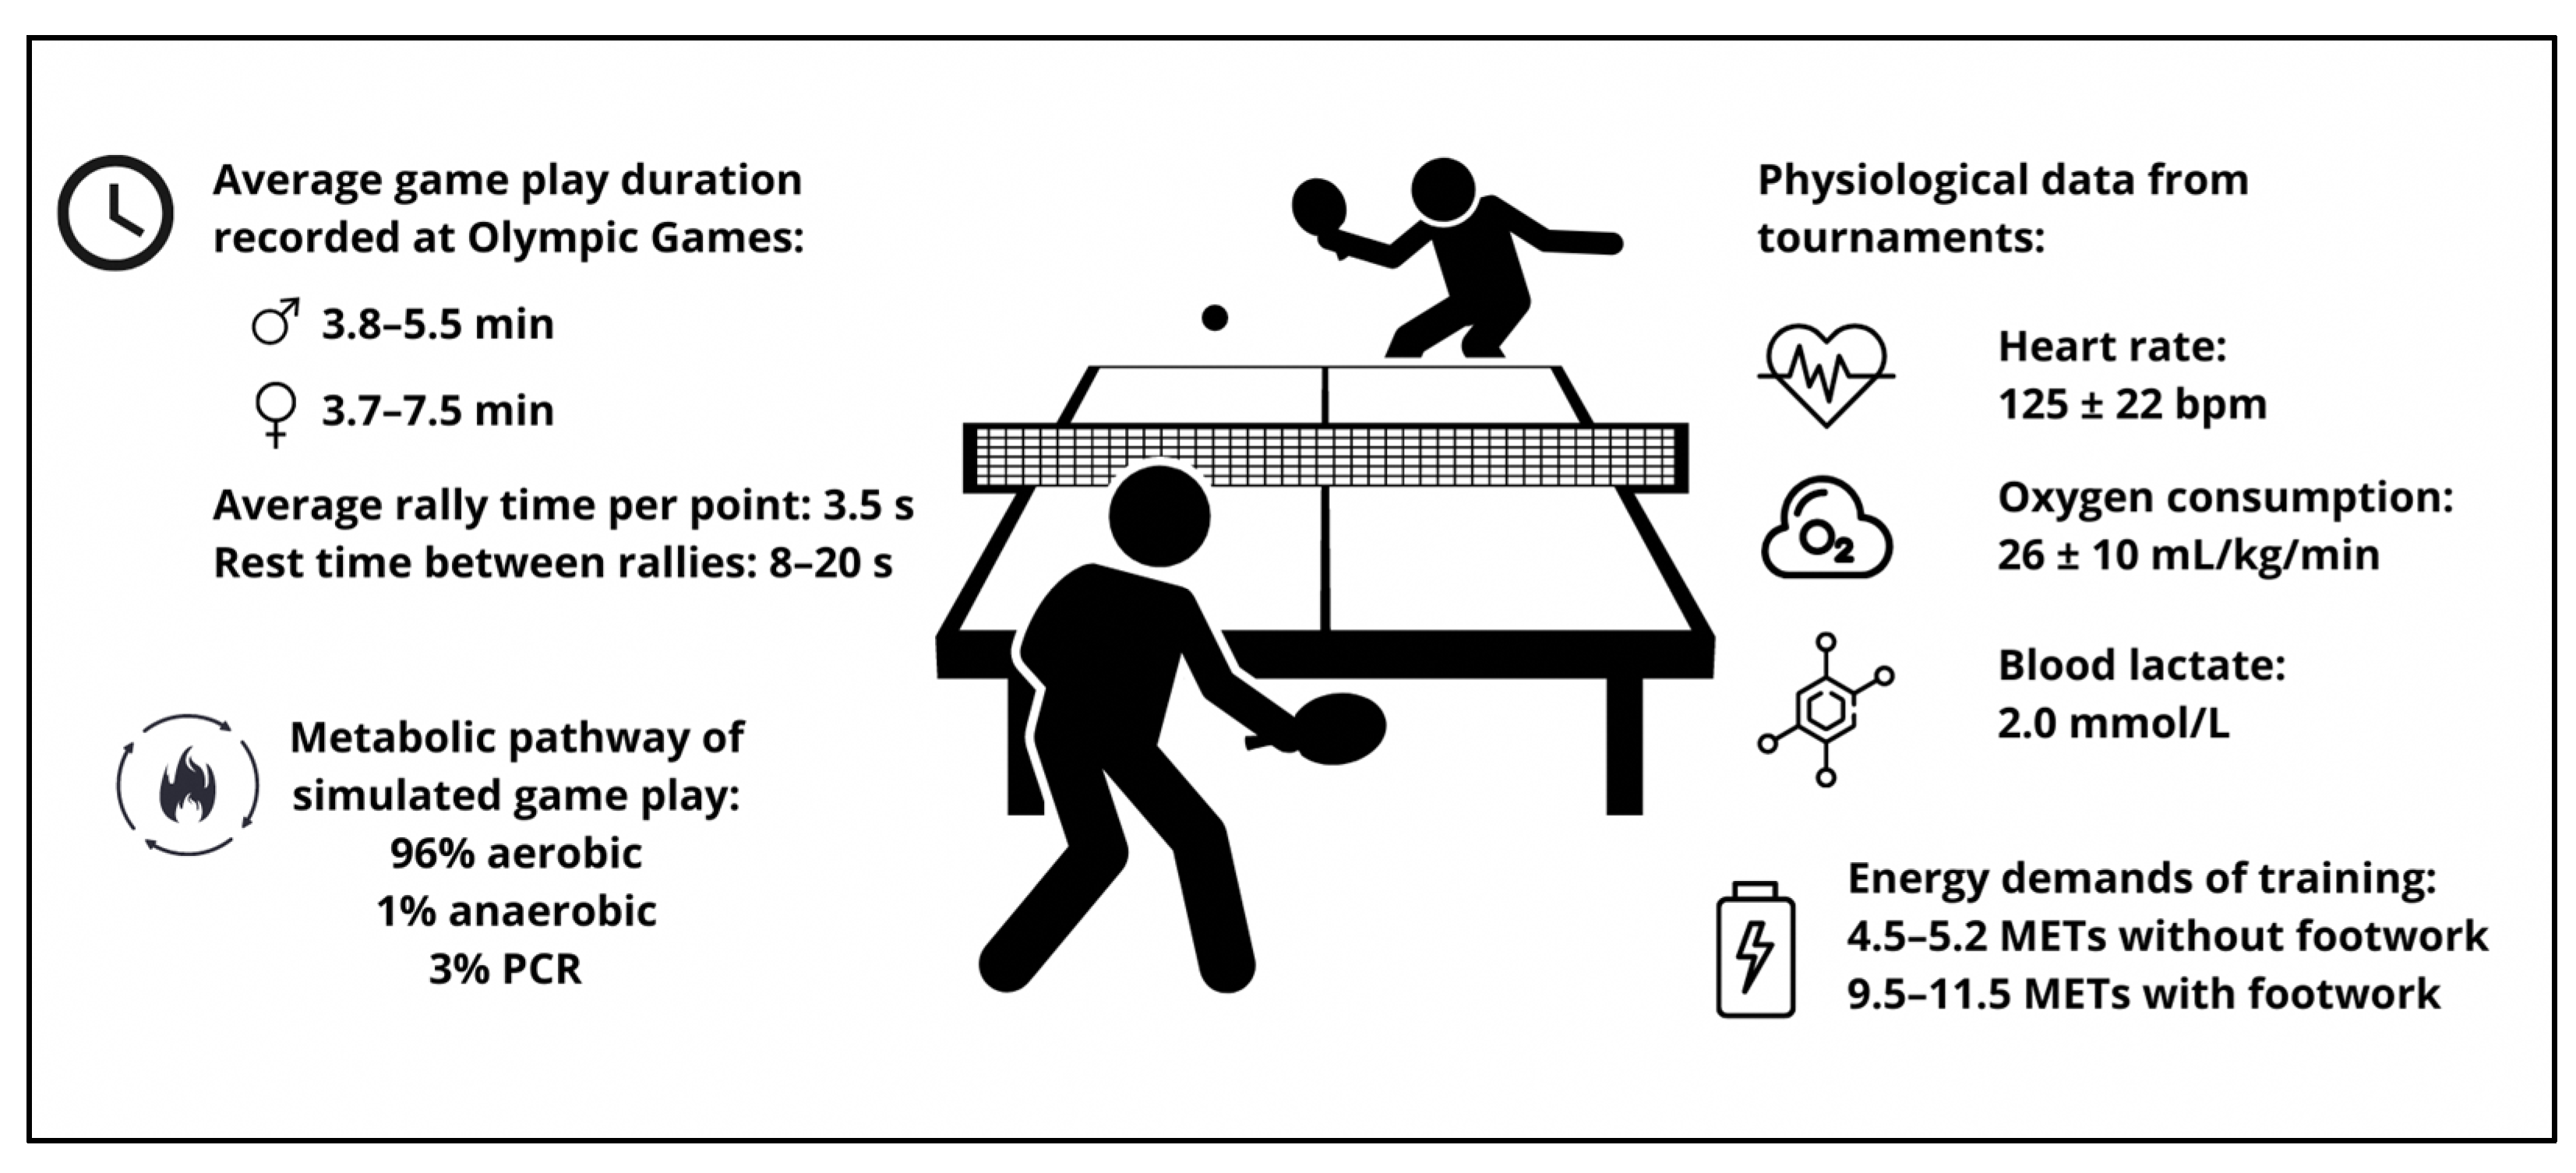 Nutrients | Free Full-Text | Nutrition Recommendations for Table Tennis  Players&mdash;A Narrative Review